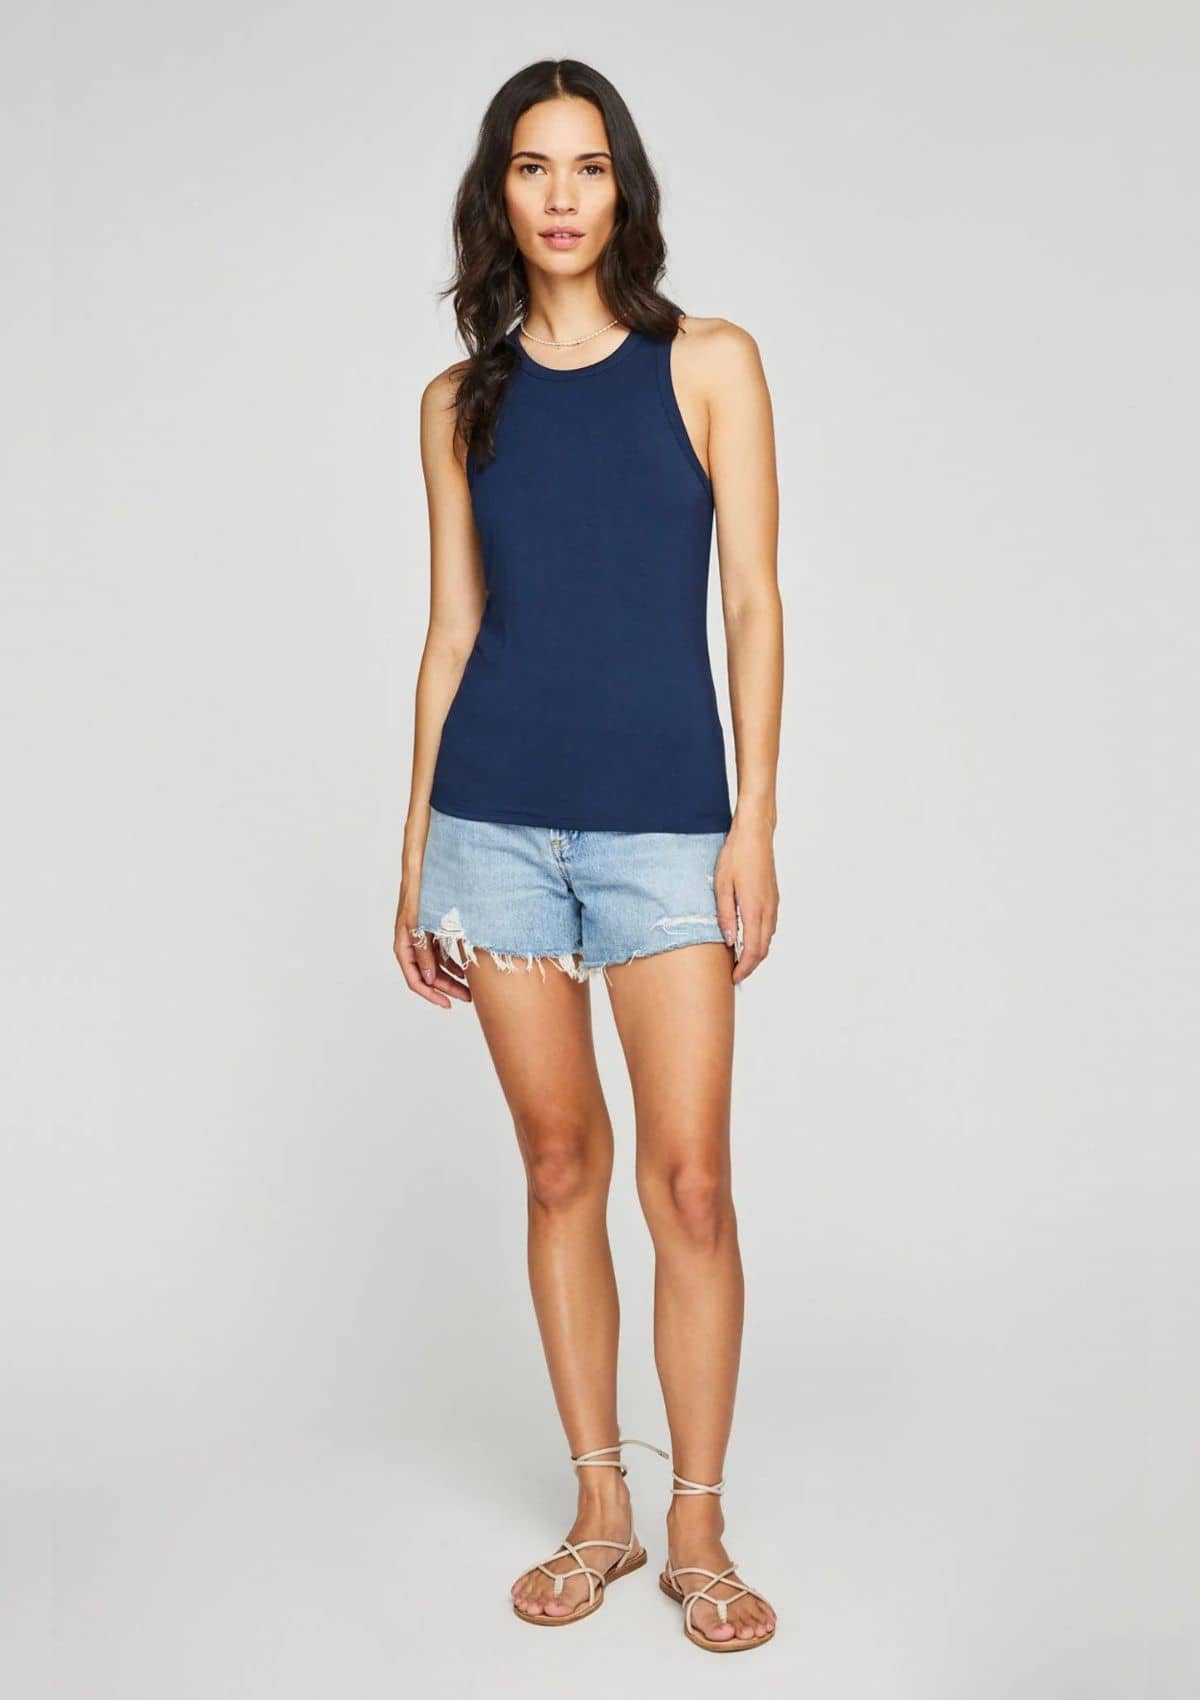 Navy racerback. Paired with jean shorts and white sandals.